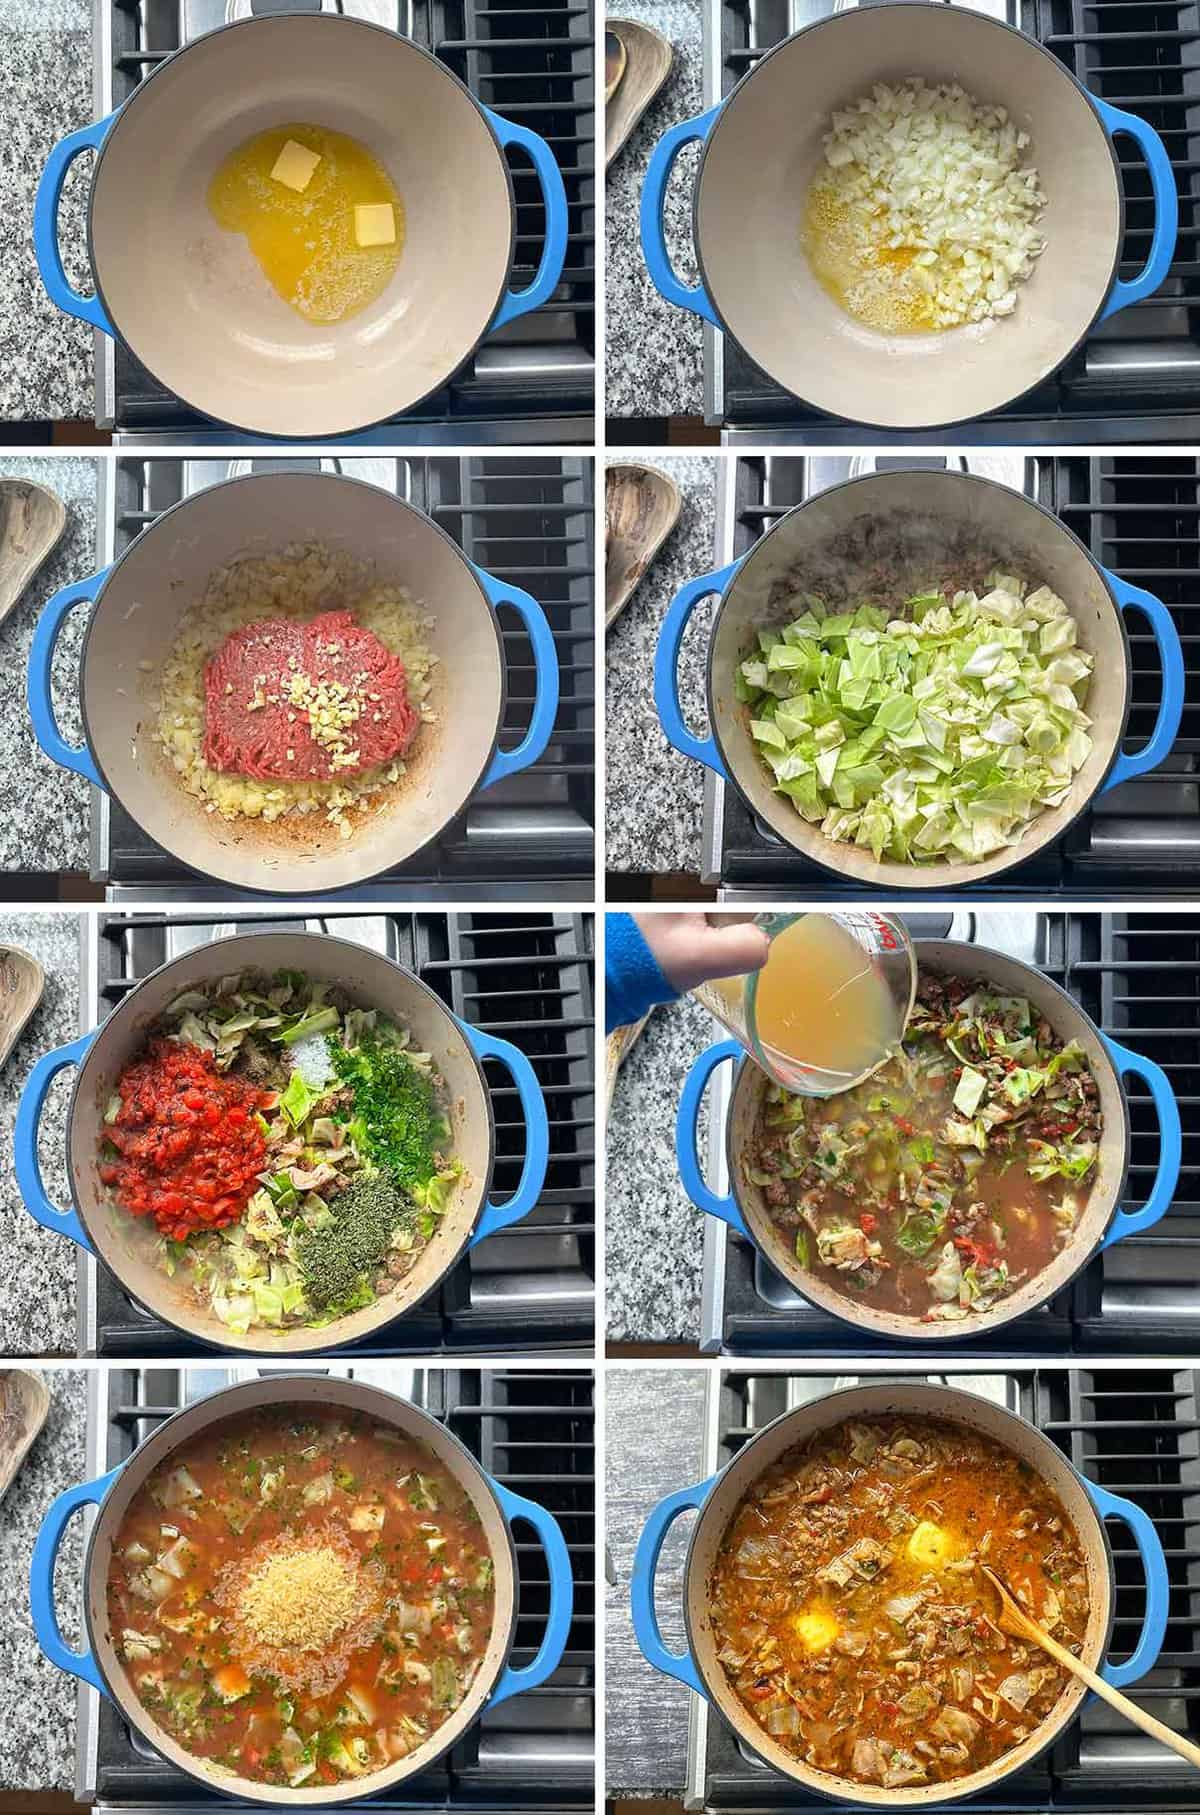 Process collage showing the steps for making stuffed cabbage roll soup in a pot on the stovetop.